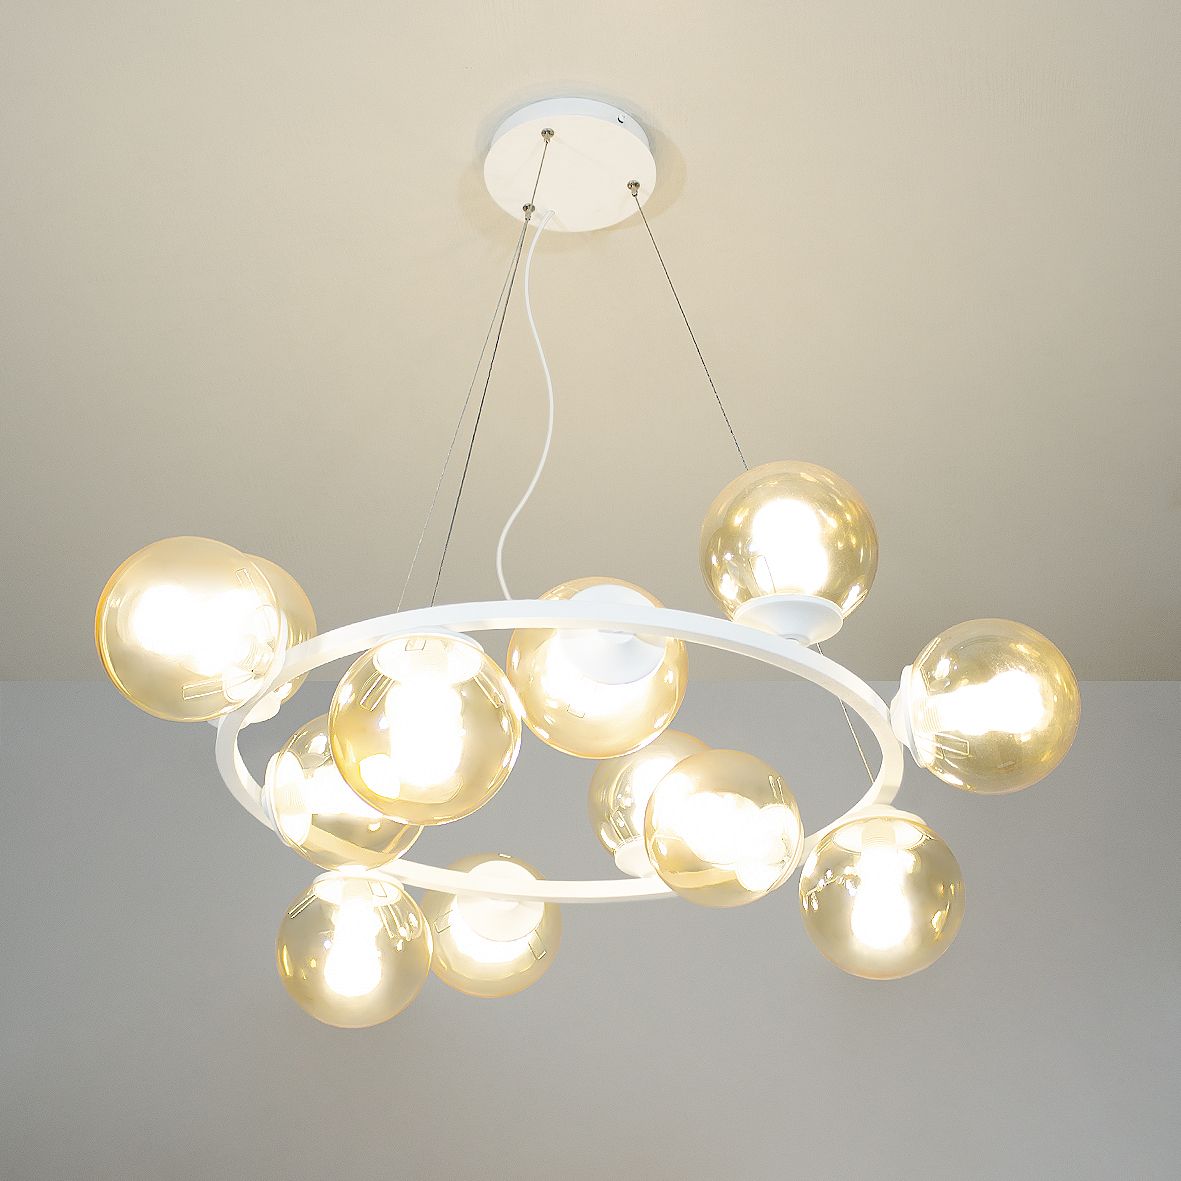 Suspension lamp Frost white / brown